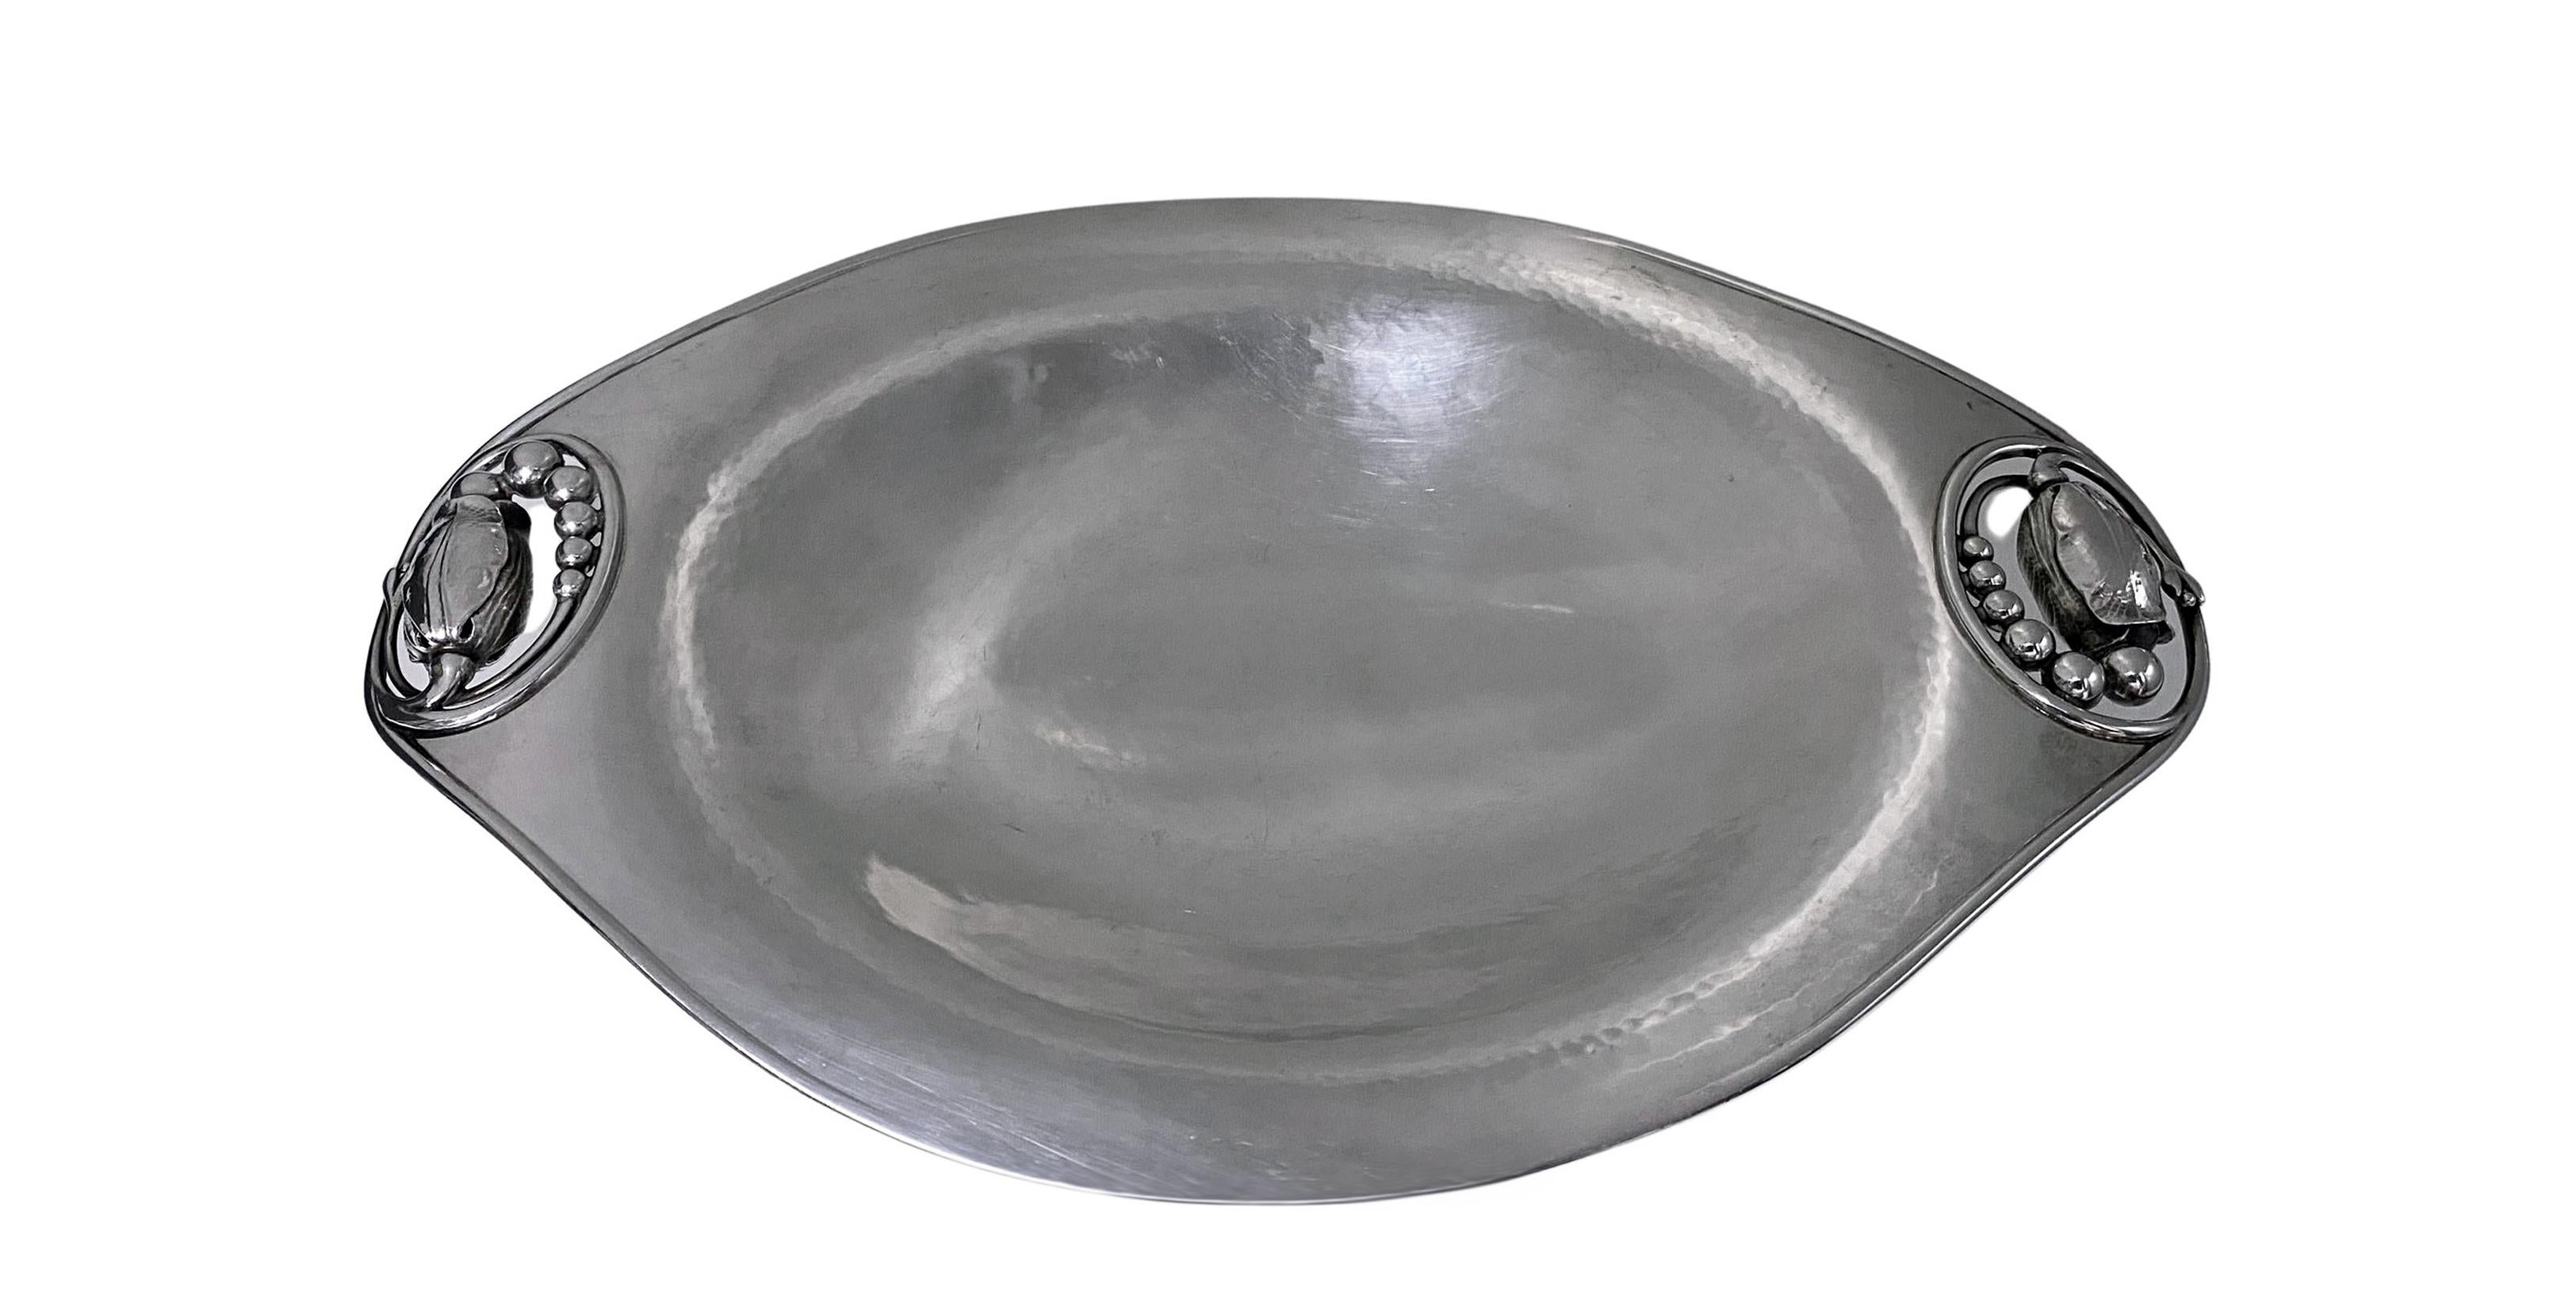 Georg Jensen sterling silver blossom or magnolia oval footed dish tray Denmark post 1945, design #2A. Lightly hand hammered finish, slightly undulating sides, handles reverse open blossom buds, plain pedestal base Measures: 12.00 (length) x 7.75 x